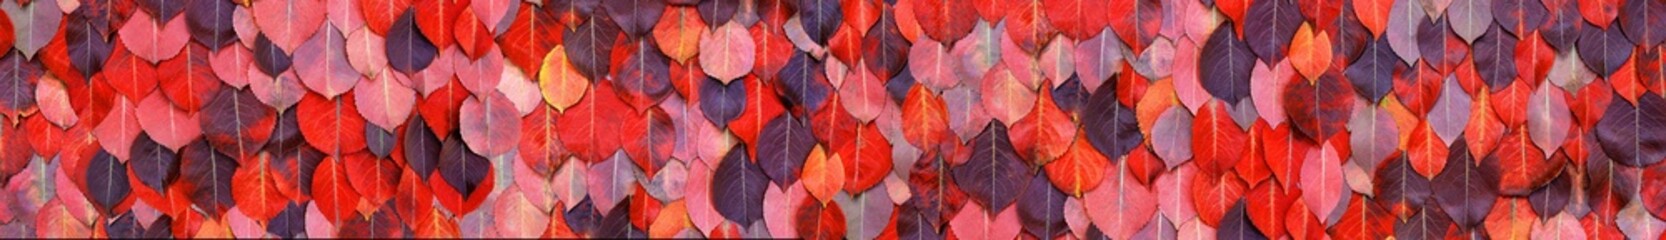 Autumn leaves wide background as floral pattern or wallpaper for fall season concept and plant design. High quality details.